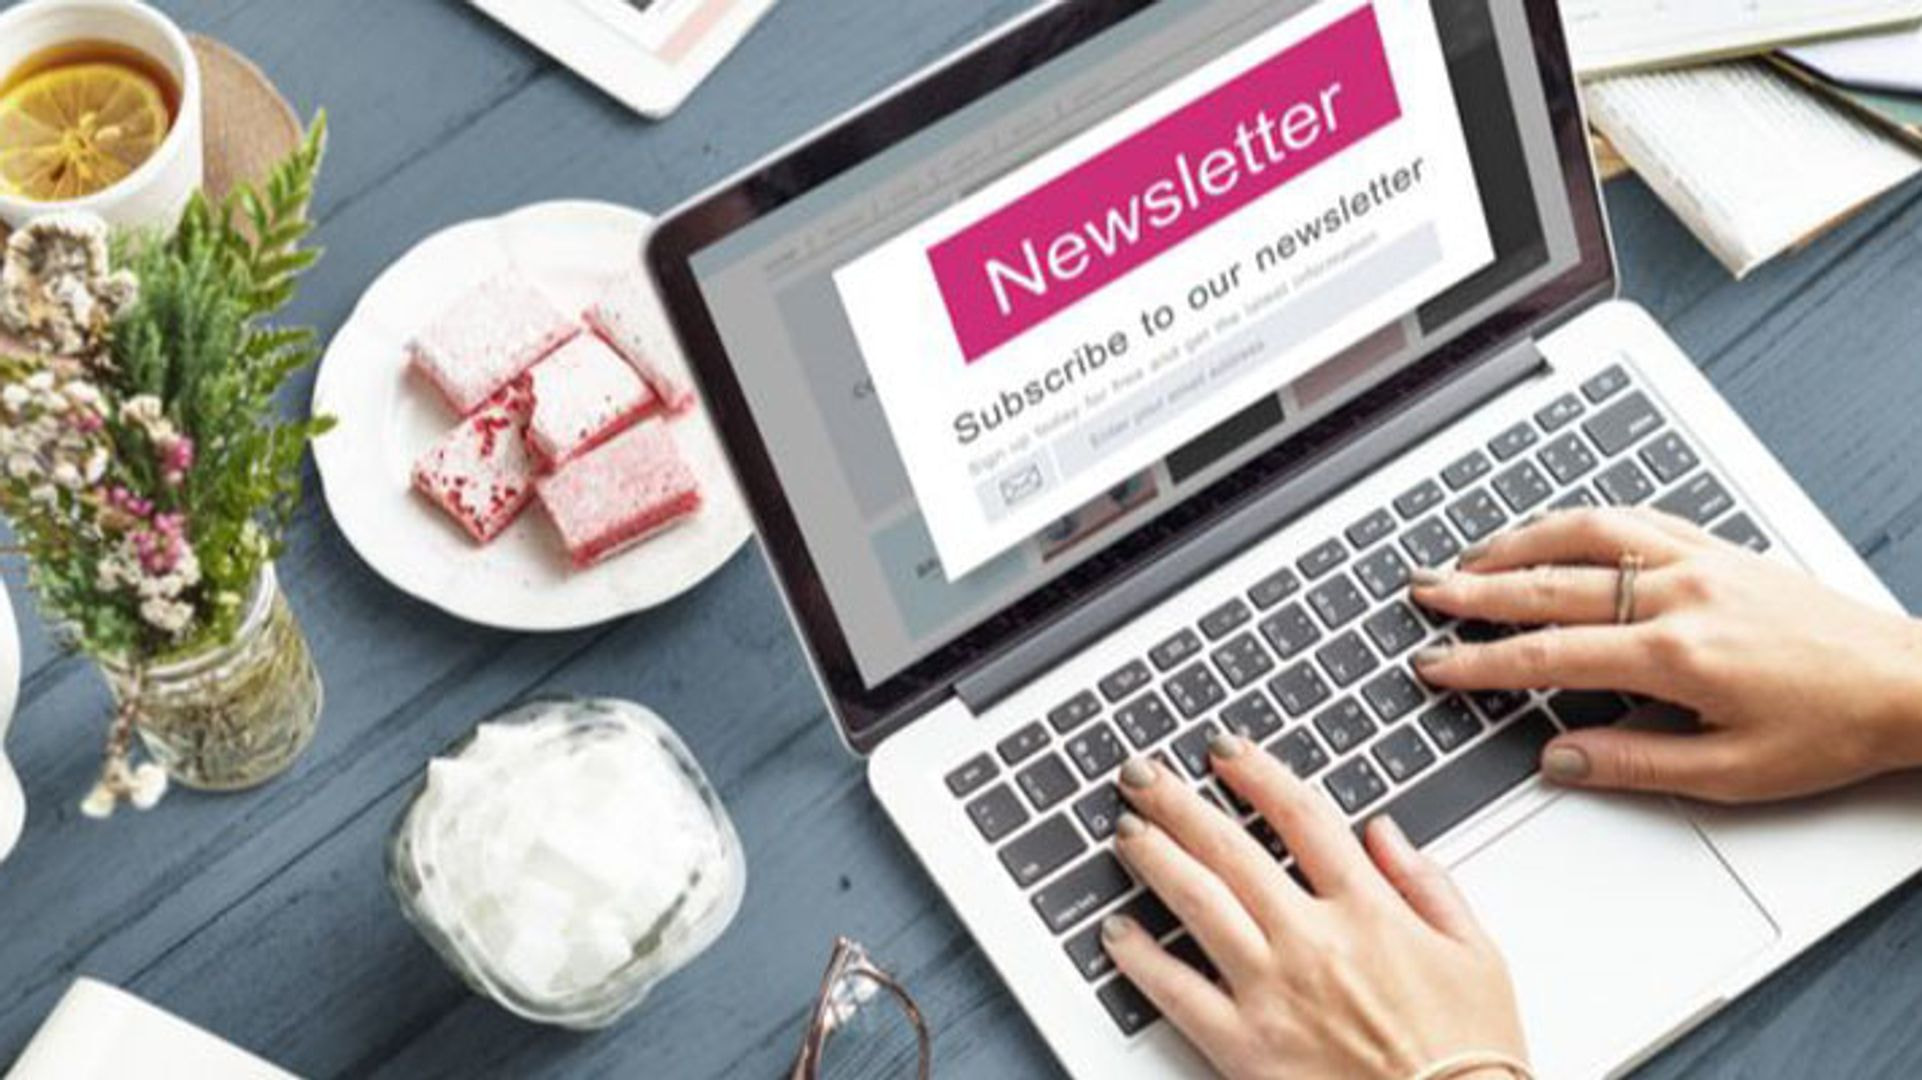 Best Marketing Practices - How to Prepare a Really Good Newsletter